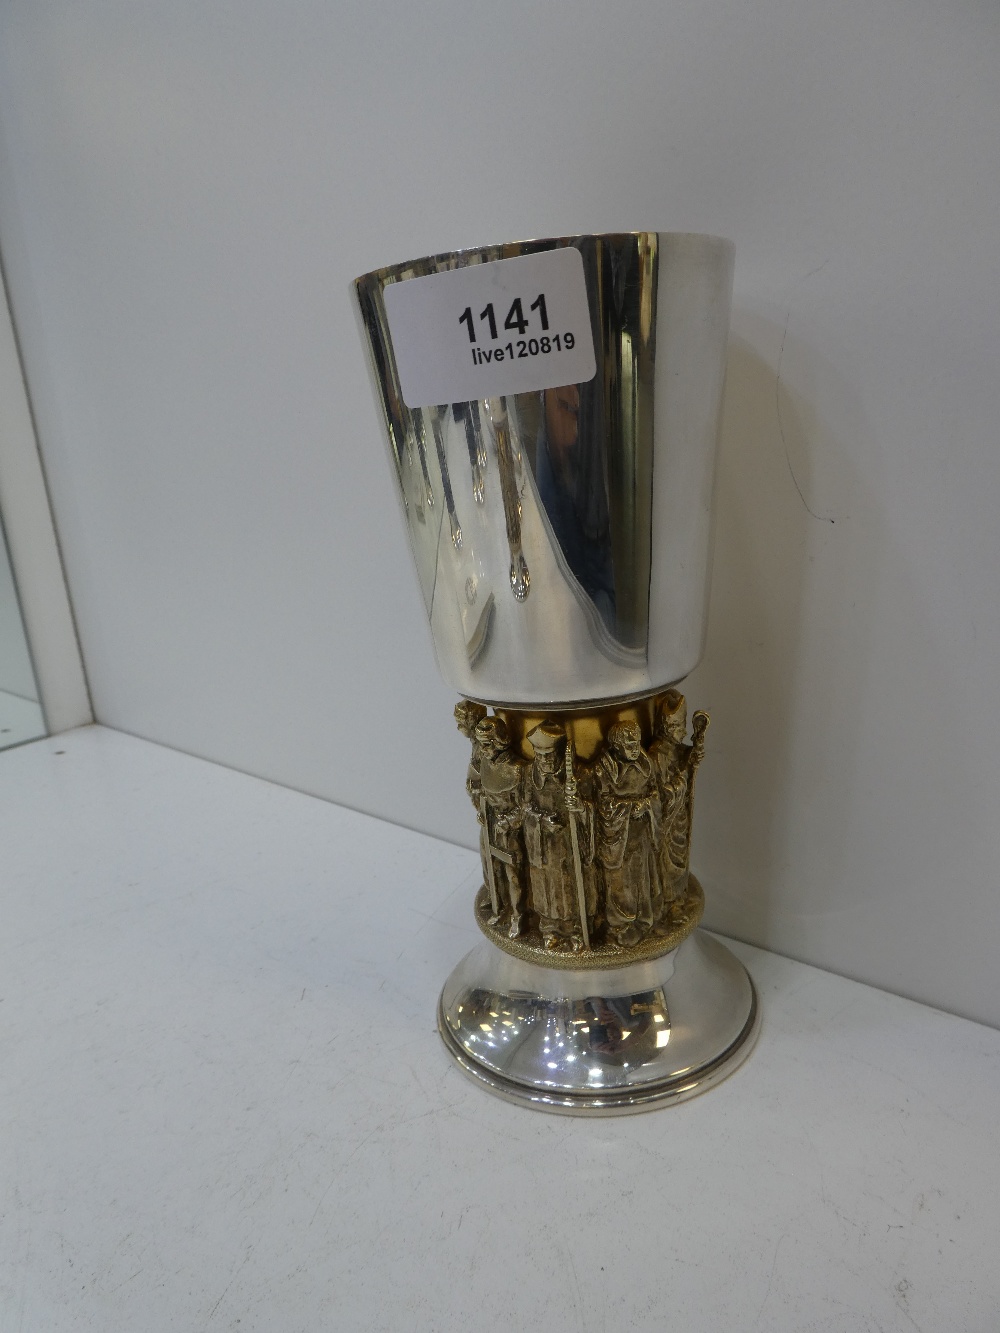 Silver Wincher Cathedral Goblet, limited edition of 900 commissioned by The Dean & Chapter to